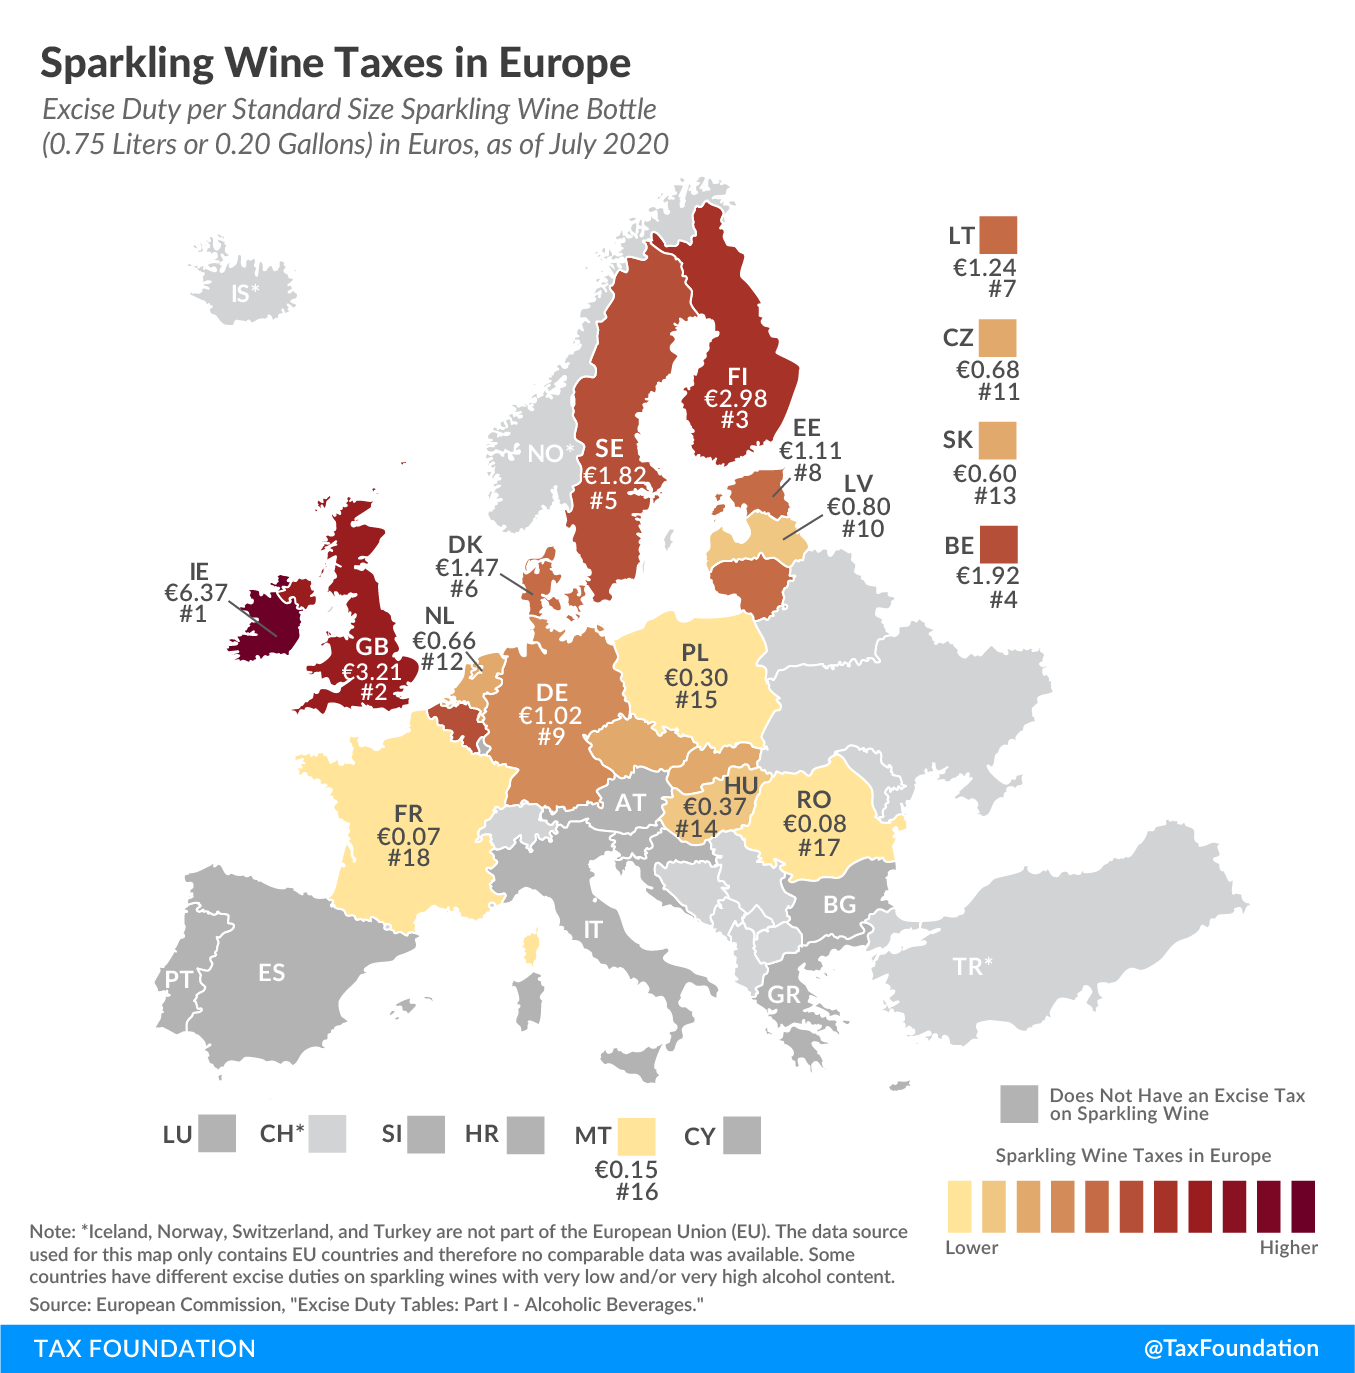 New Year's Eve taxes, Sparkling wine taxes in Europe